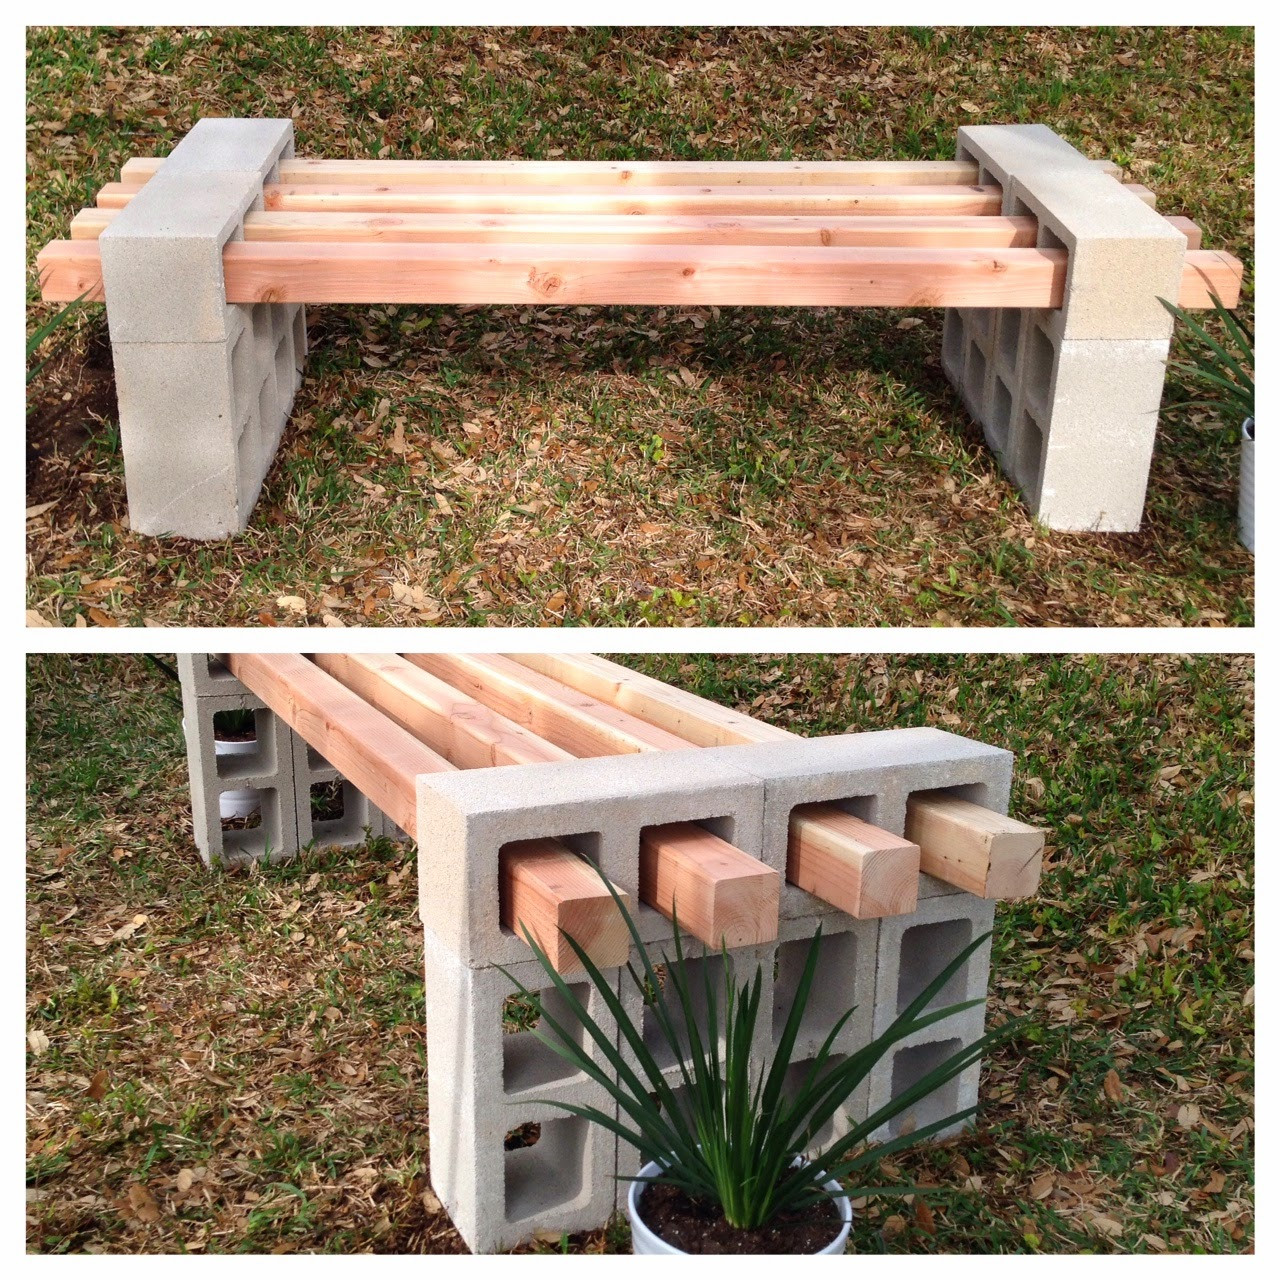 DIY Wood Bench
 20 Awesome DIY Cinder Block Projects For Your Homestead